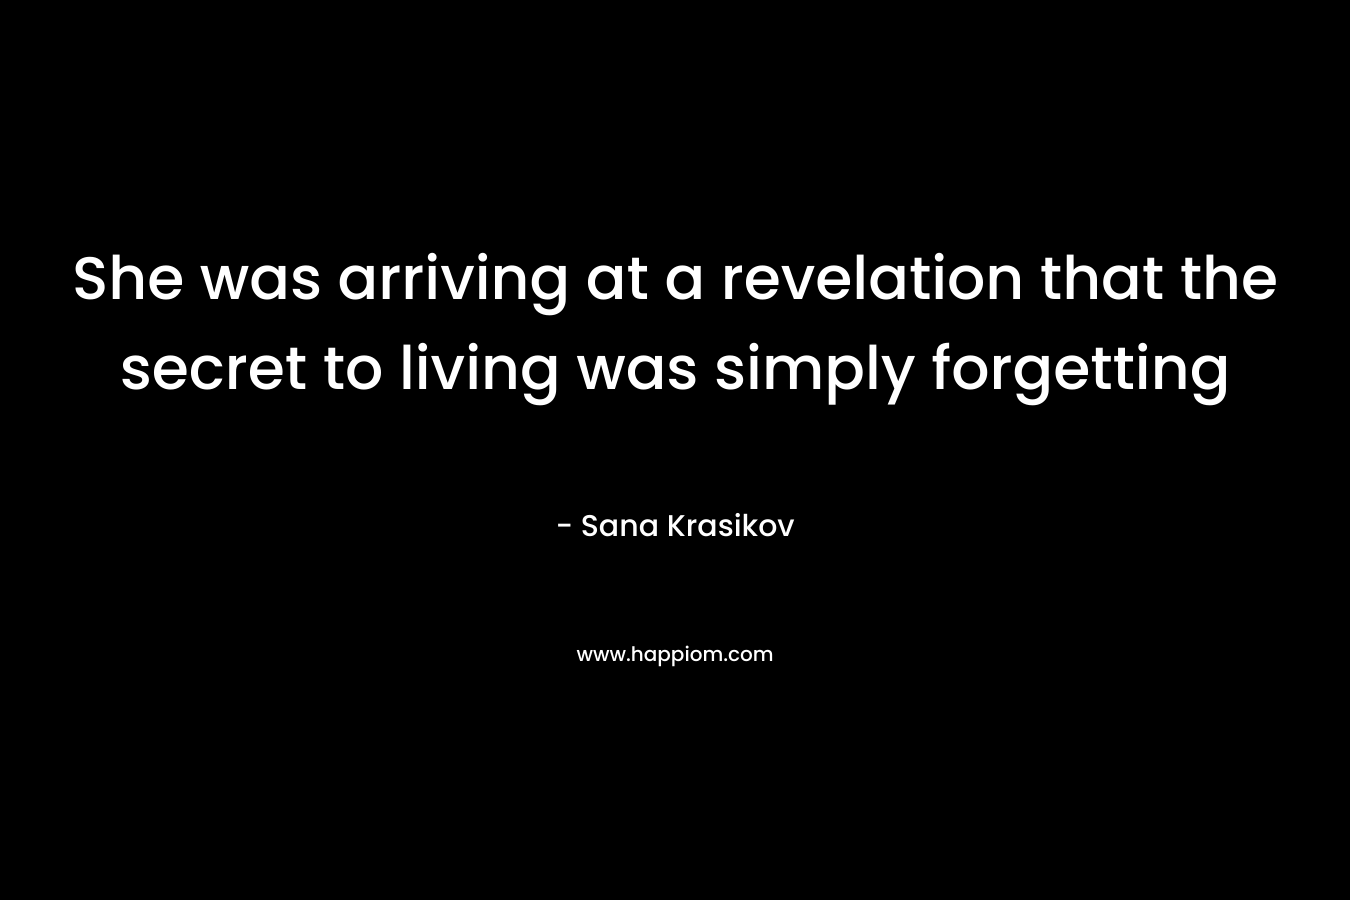 She was arriving at a revelation that the secret to living was simply forgetting